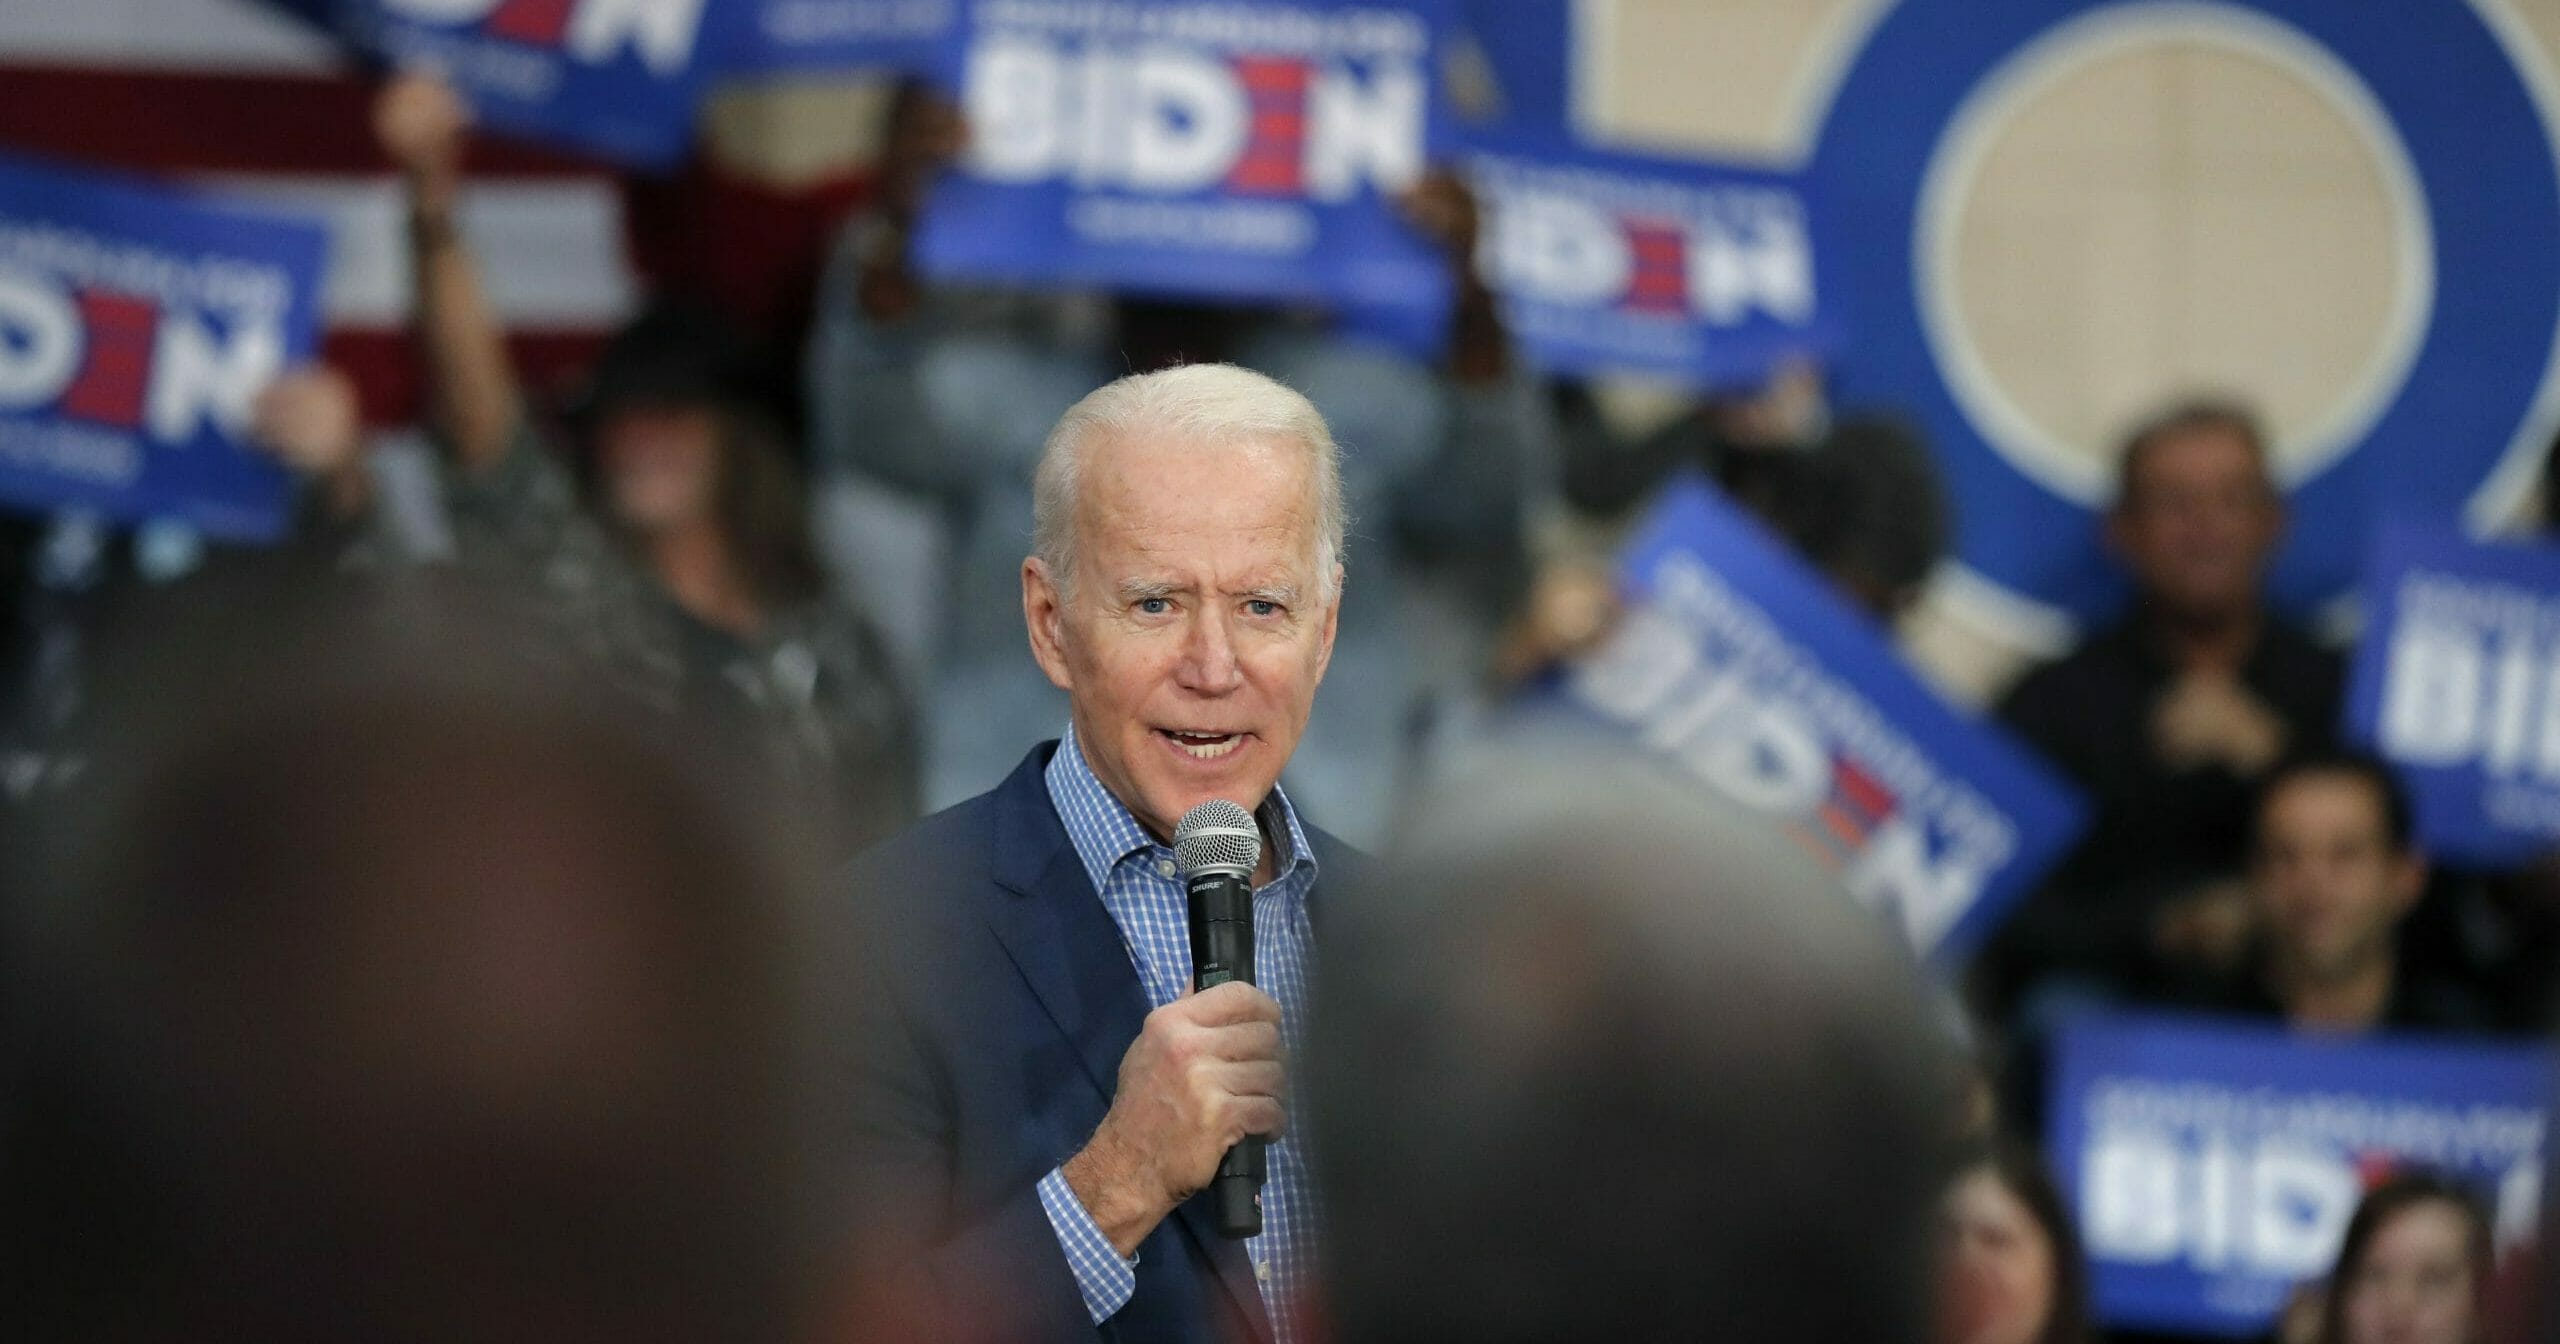 Democratic presidential candidate former Vice President Joe Biden speaks at a campaign event in Conway, South Carolina, on Feb. 27, 2020.